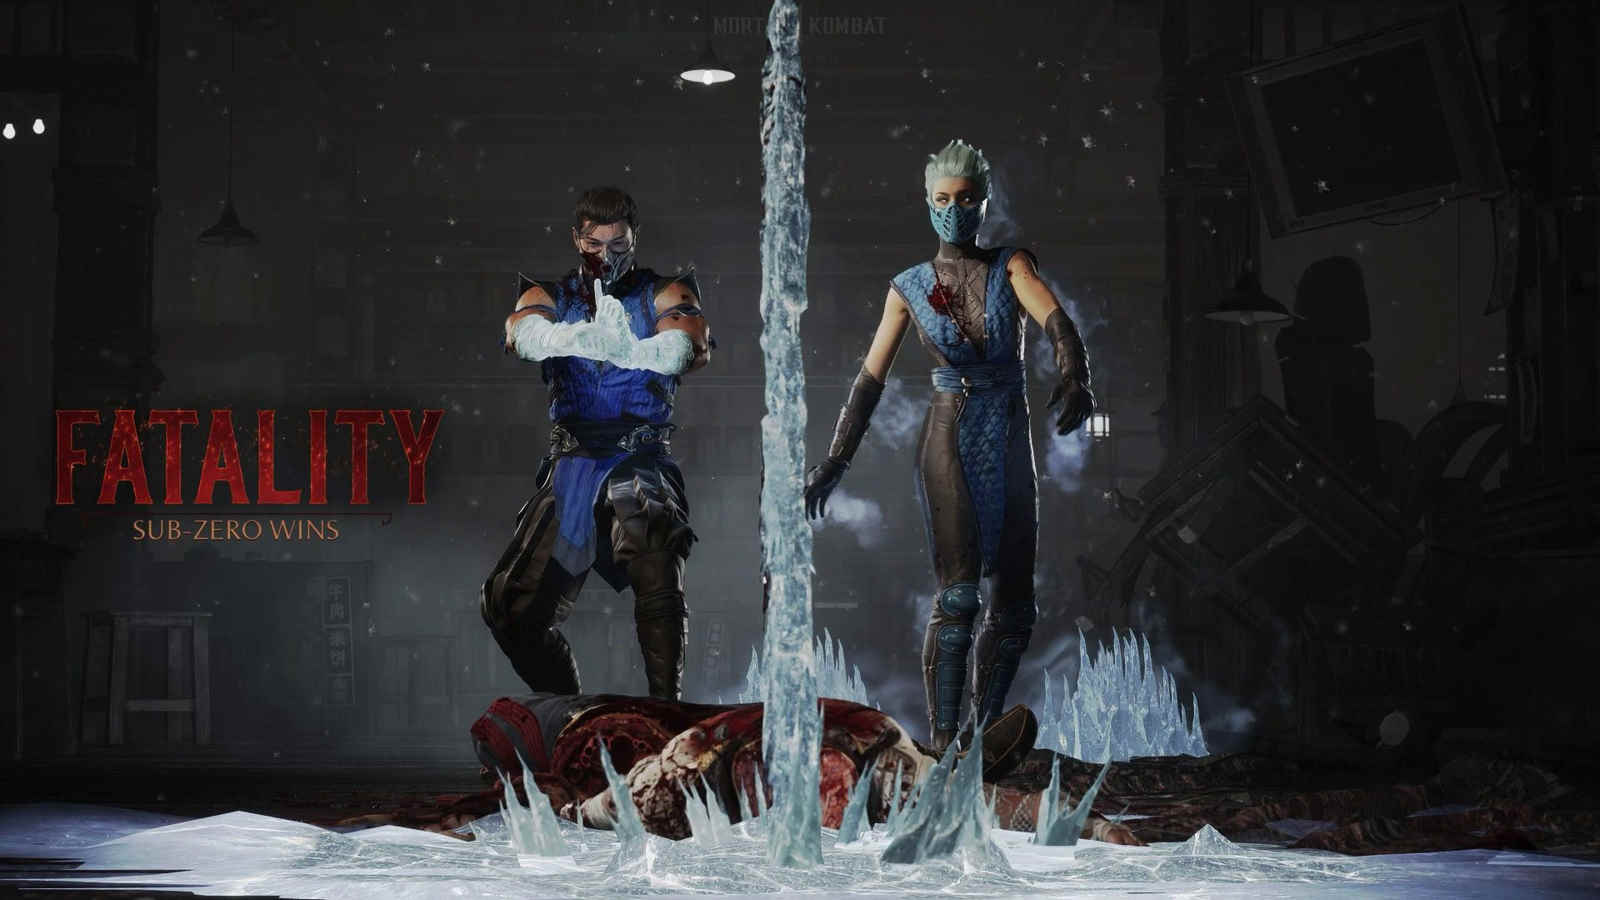 Mortal Kombat 1 Fatality list - Input codes for all characters and Kameos, Gaming, Entertainment